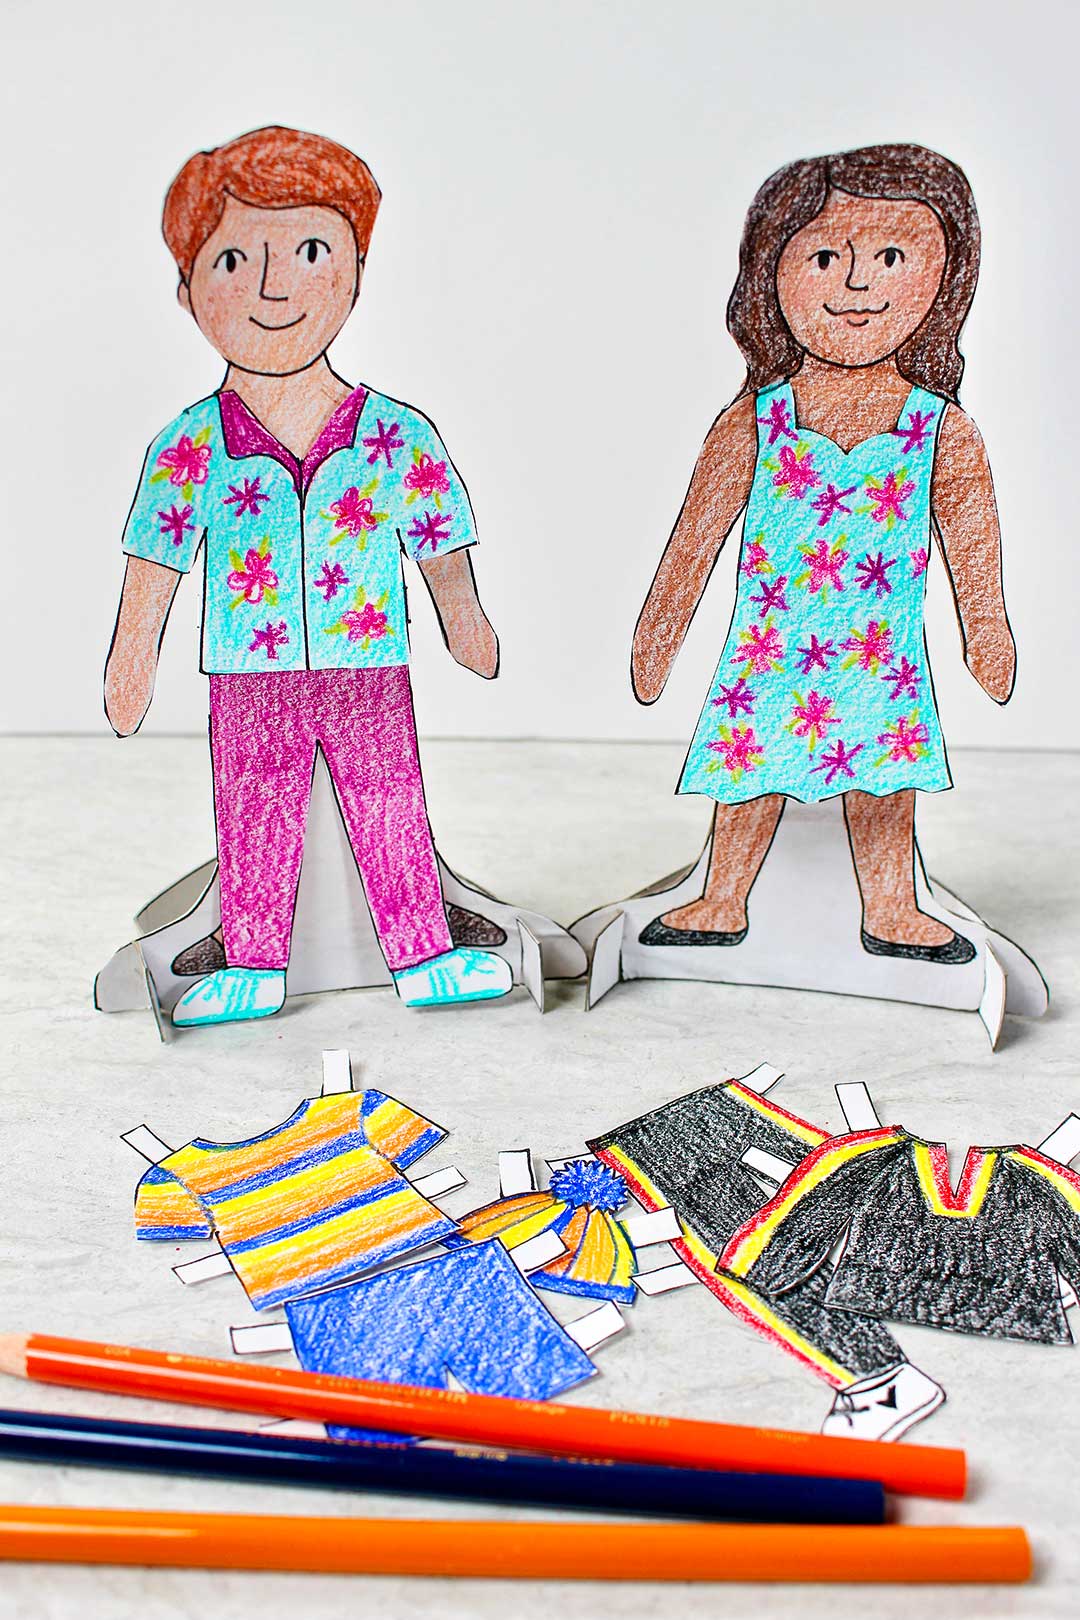 Cut Out Paper Dolls: Fashion Paper Dolls Colouring Book Edition & Dress Up  for Daughter or Granddaughter